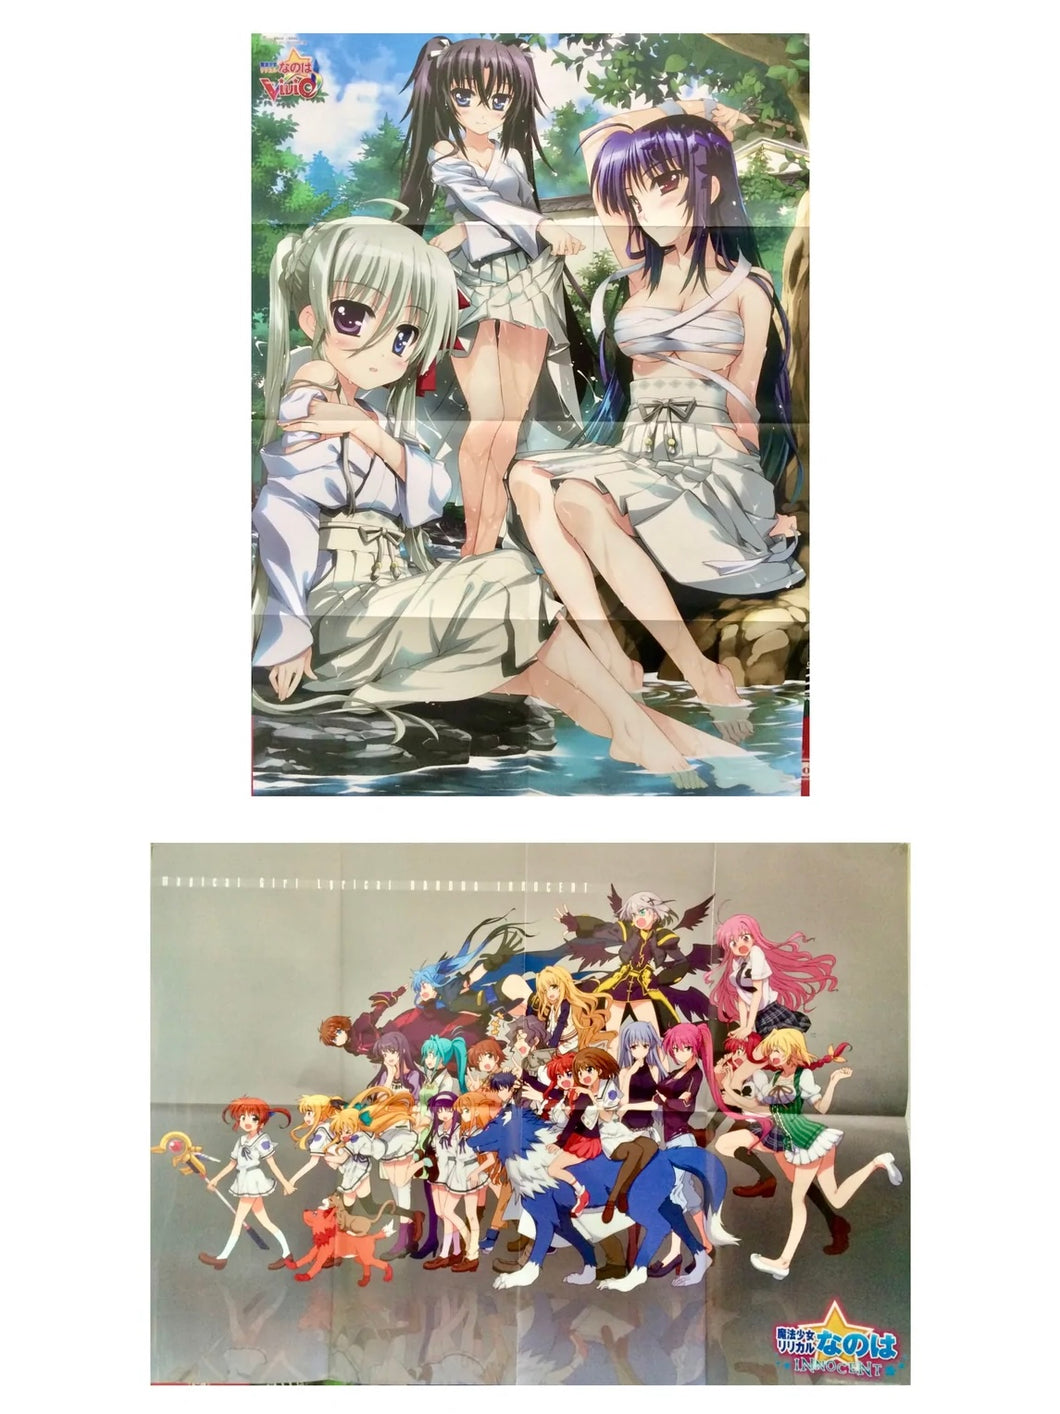 Magical Girl Lyrical Nanoha Innocent - Portable The Battle of Aces - Double-sided B2 Poster - Appendix